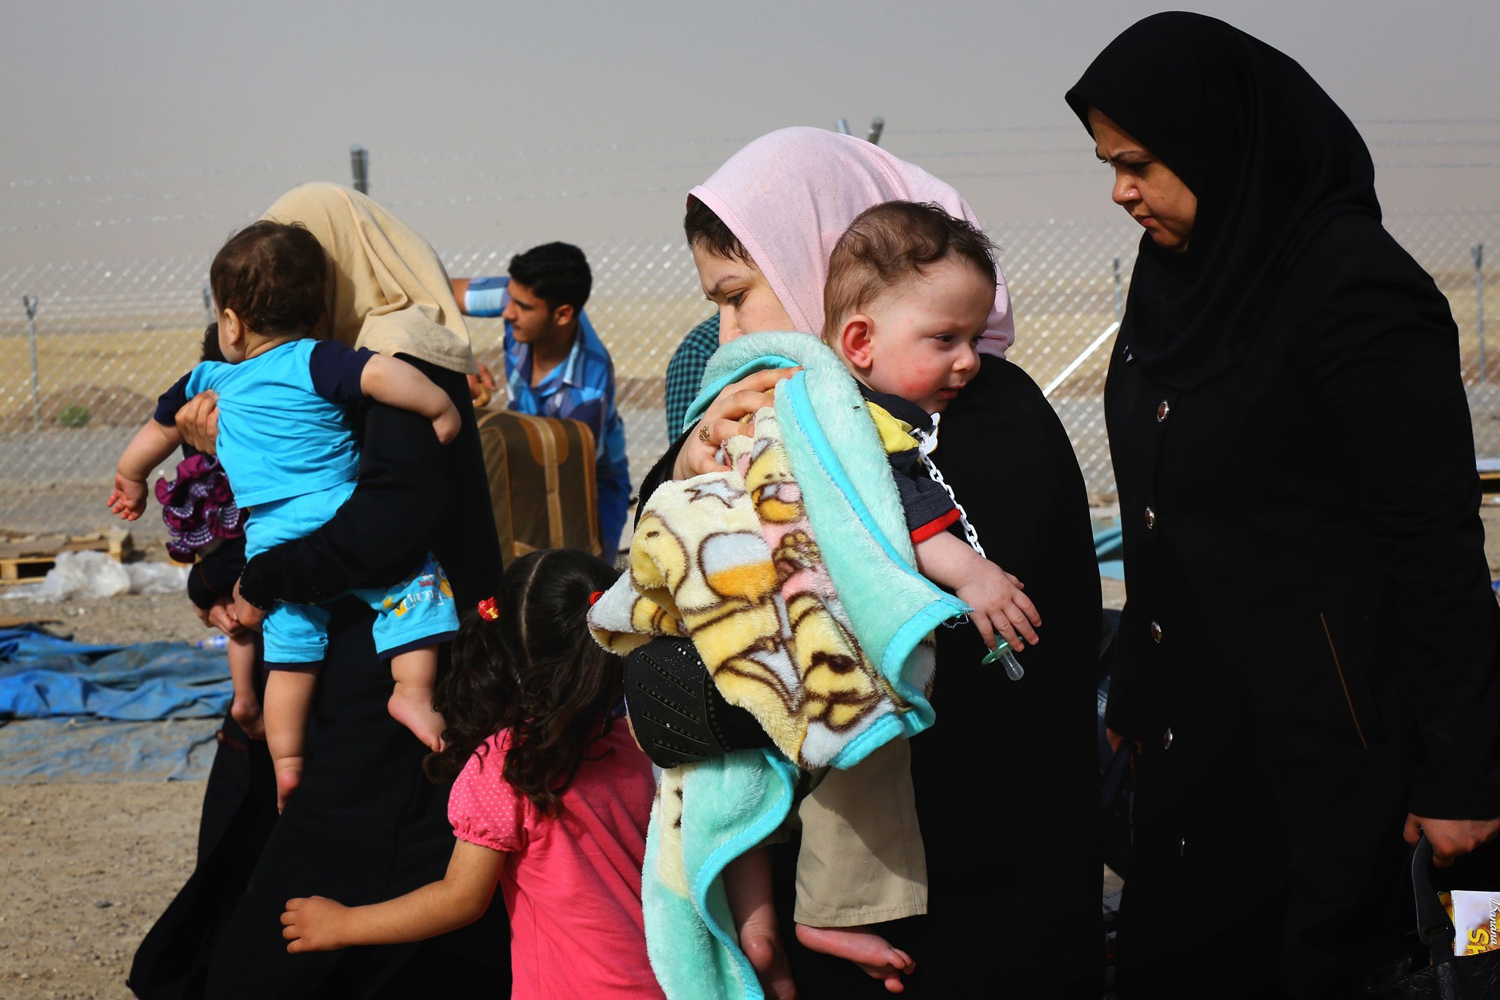 Families fleeing the violence in the Iraqi city of Mosul arrive at a checkpoint on the outskirts of Erbil, in Iraq's Kurdistan region June 12, 2014.